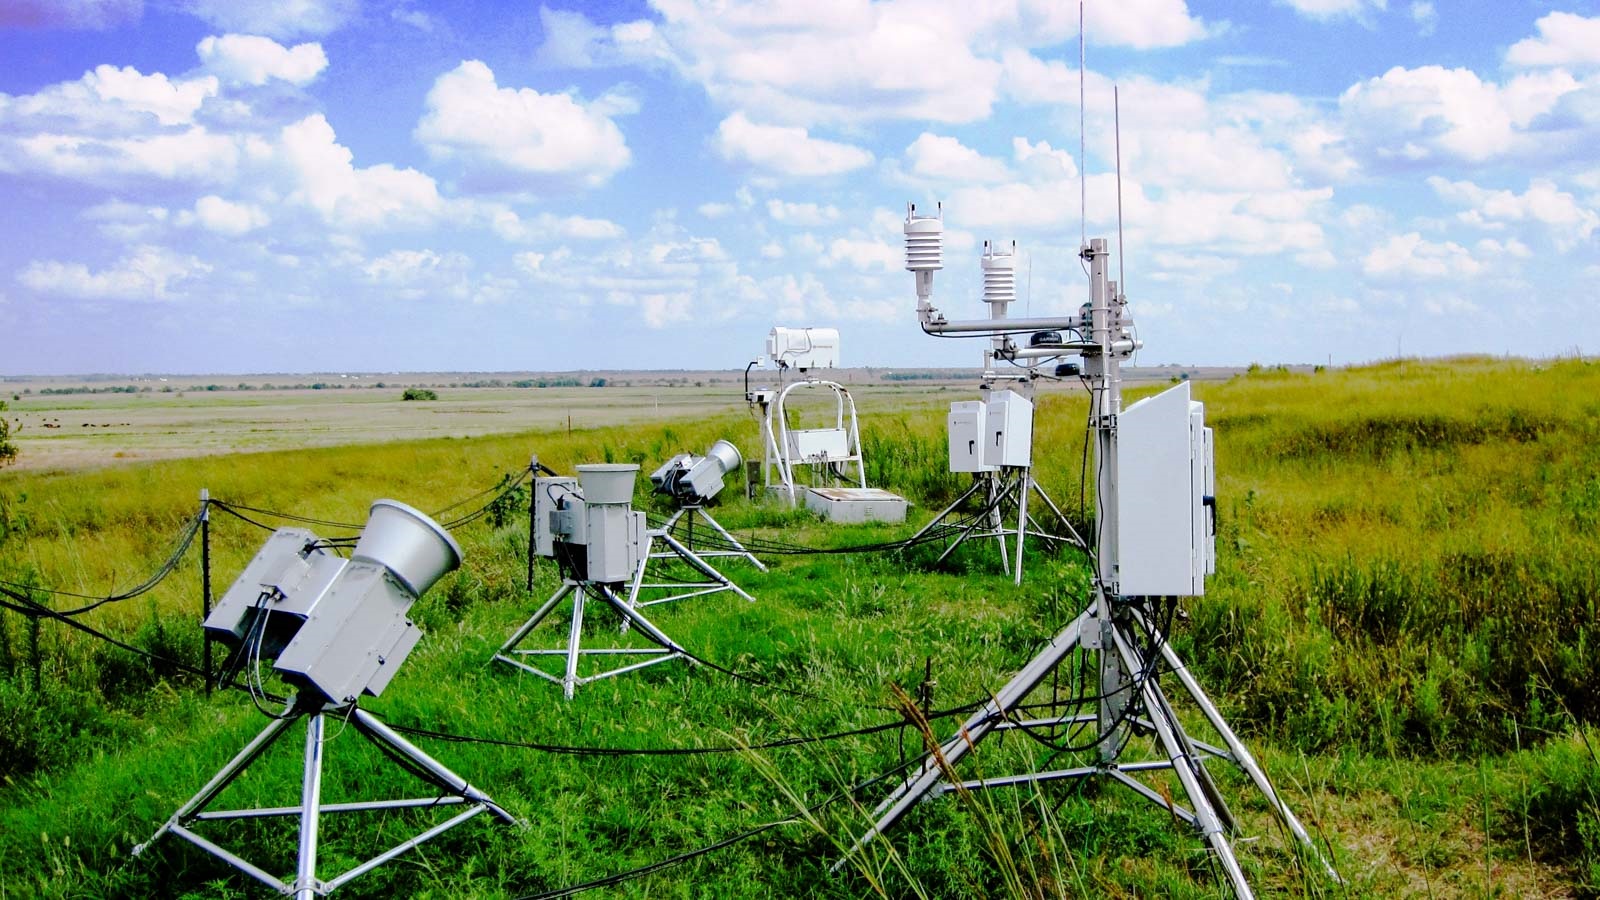 Equipment in a field. (Image by U.S. Department of Energy Atmospheric Radiation Measurement (ARM) user facility.)